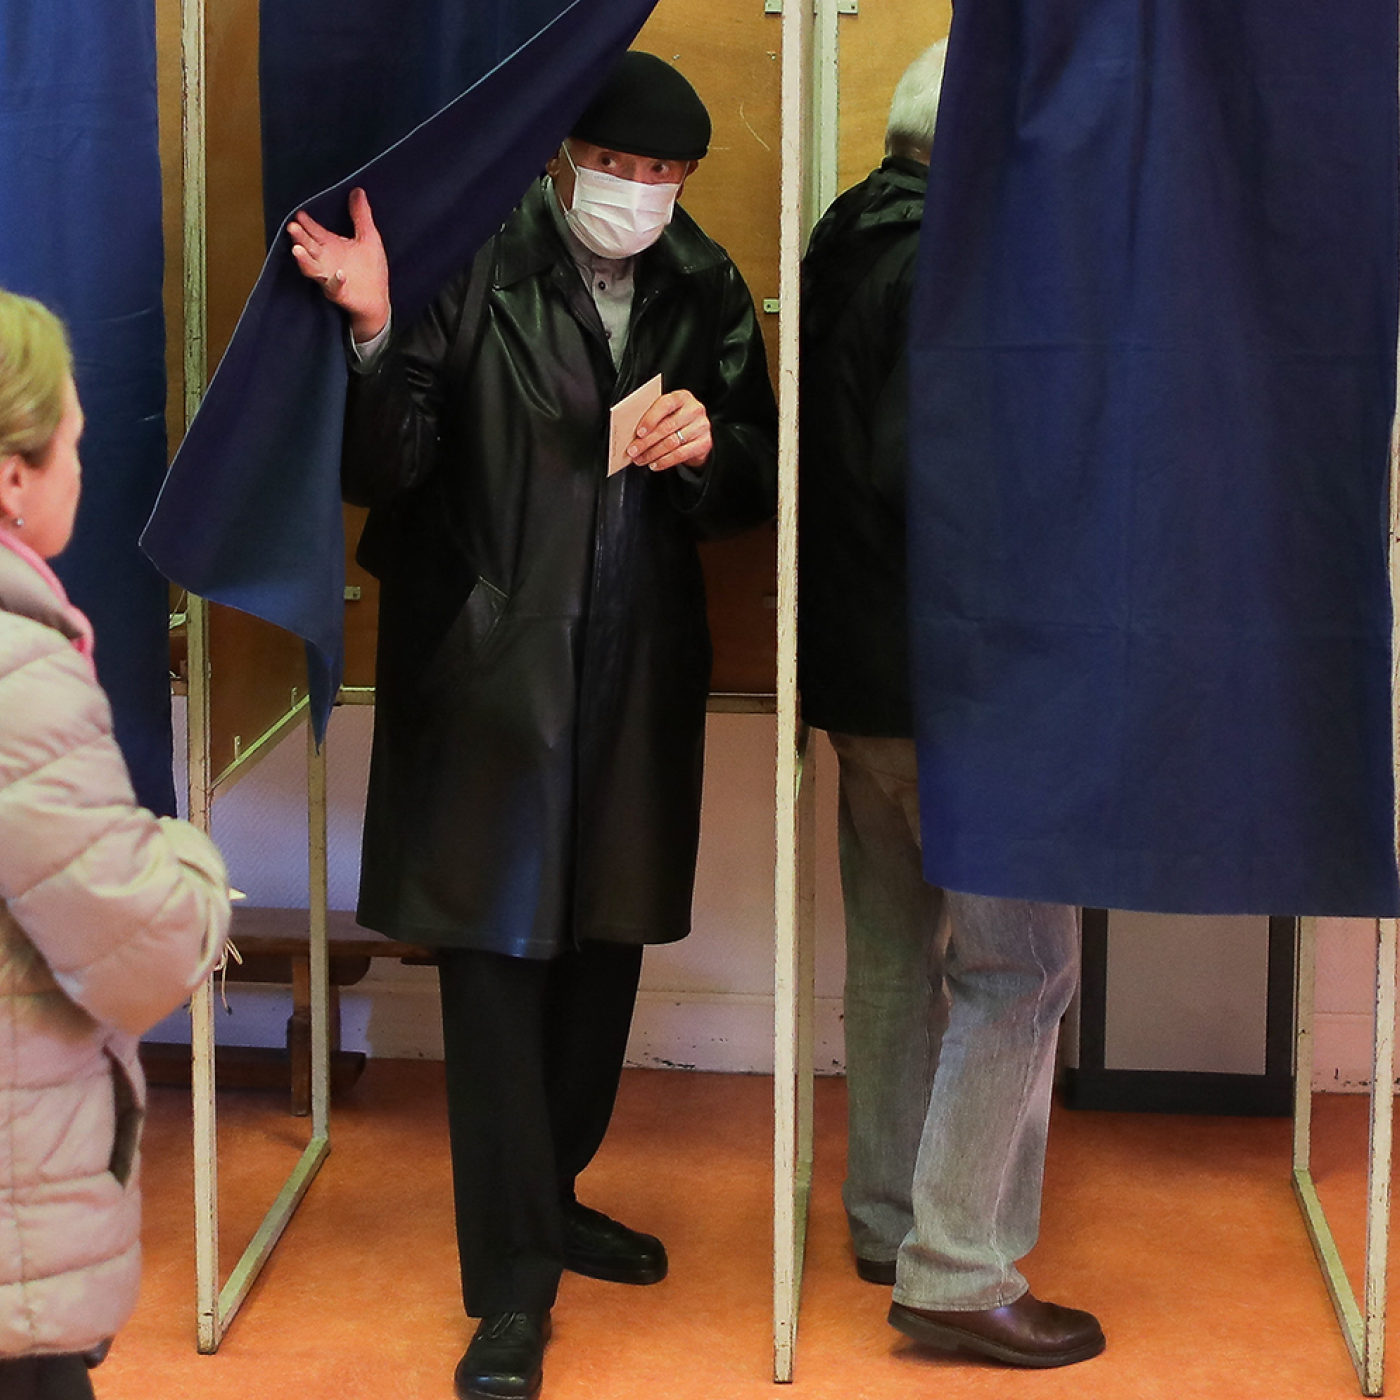 A voter wearing a medical mask exits a polling booth during France's 2020 municipal elections. © Thibaud Moritz/Abaca/Sipa USA